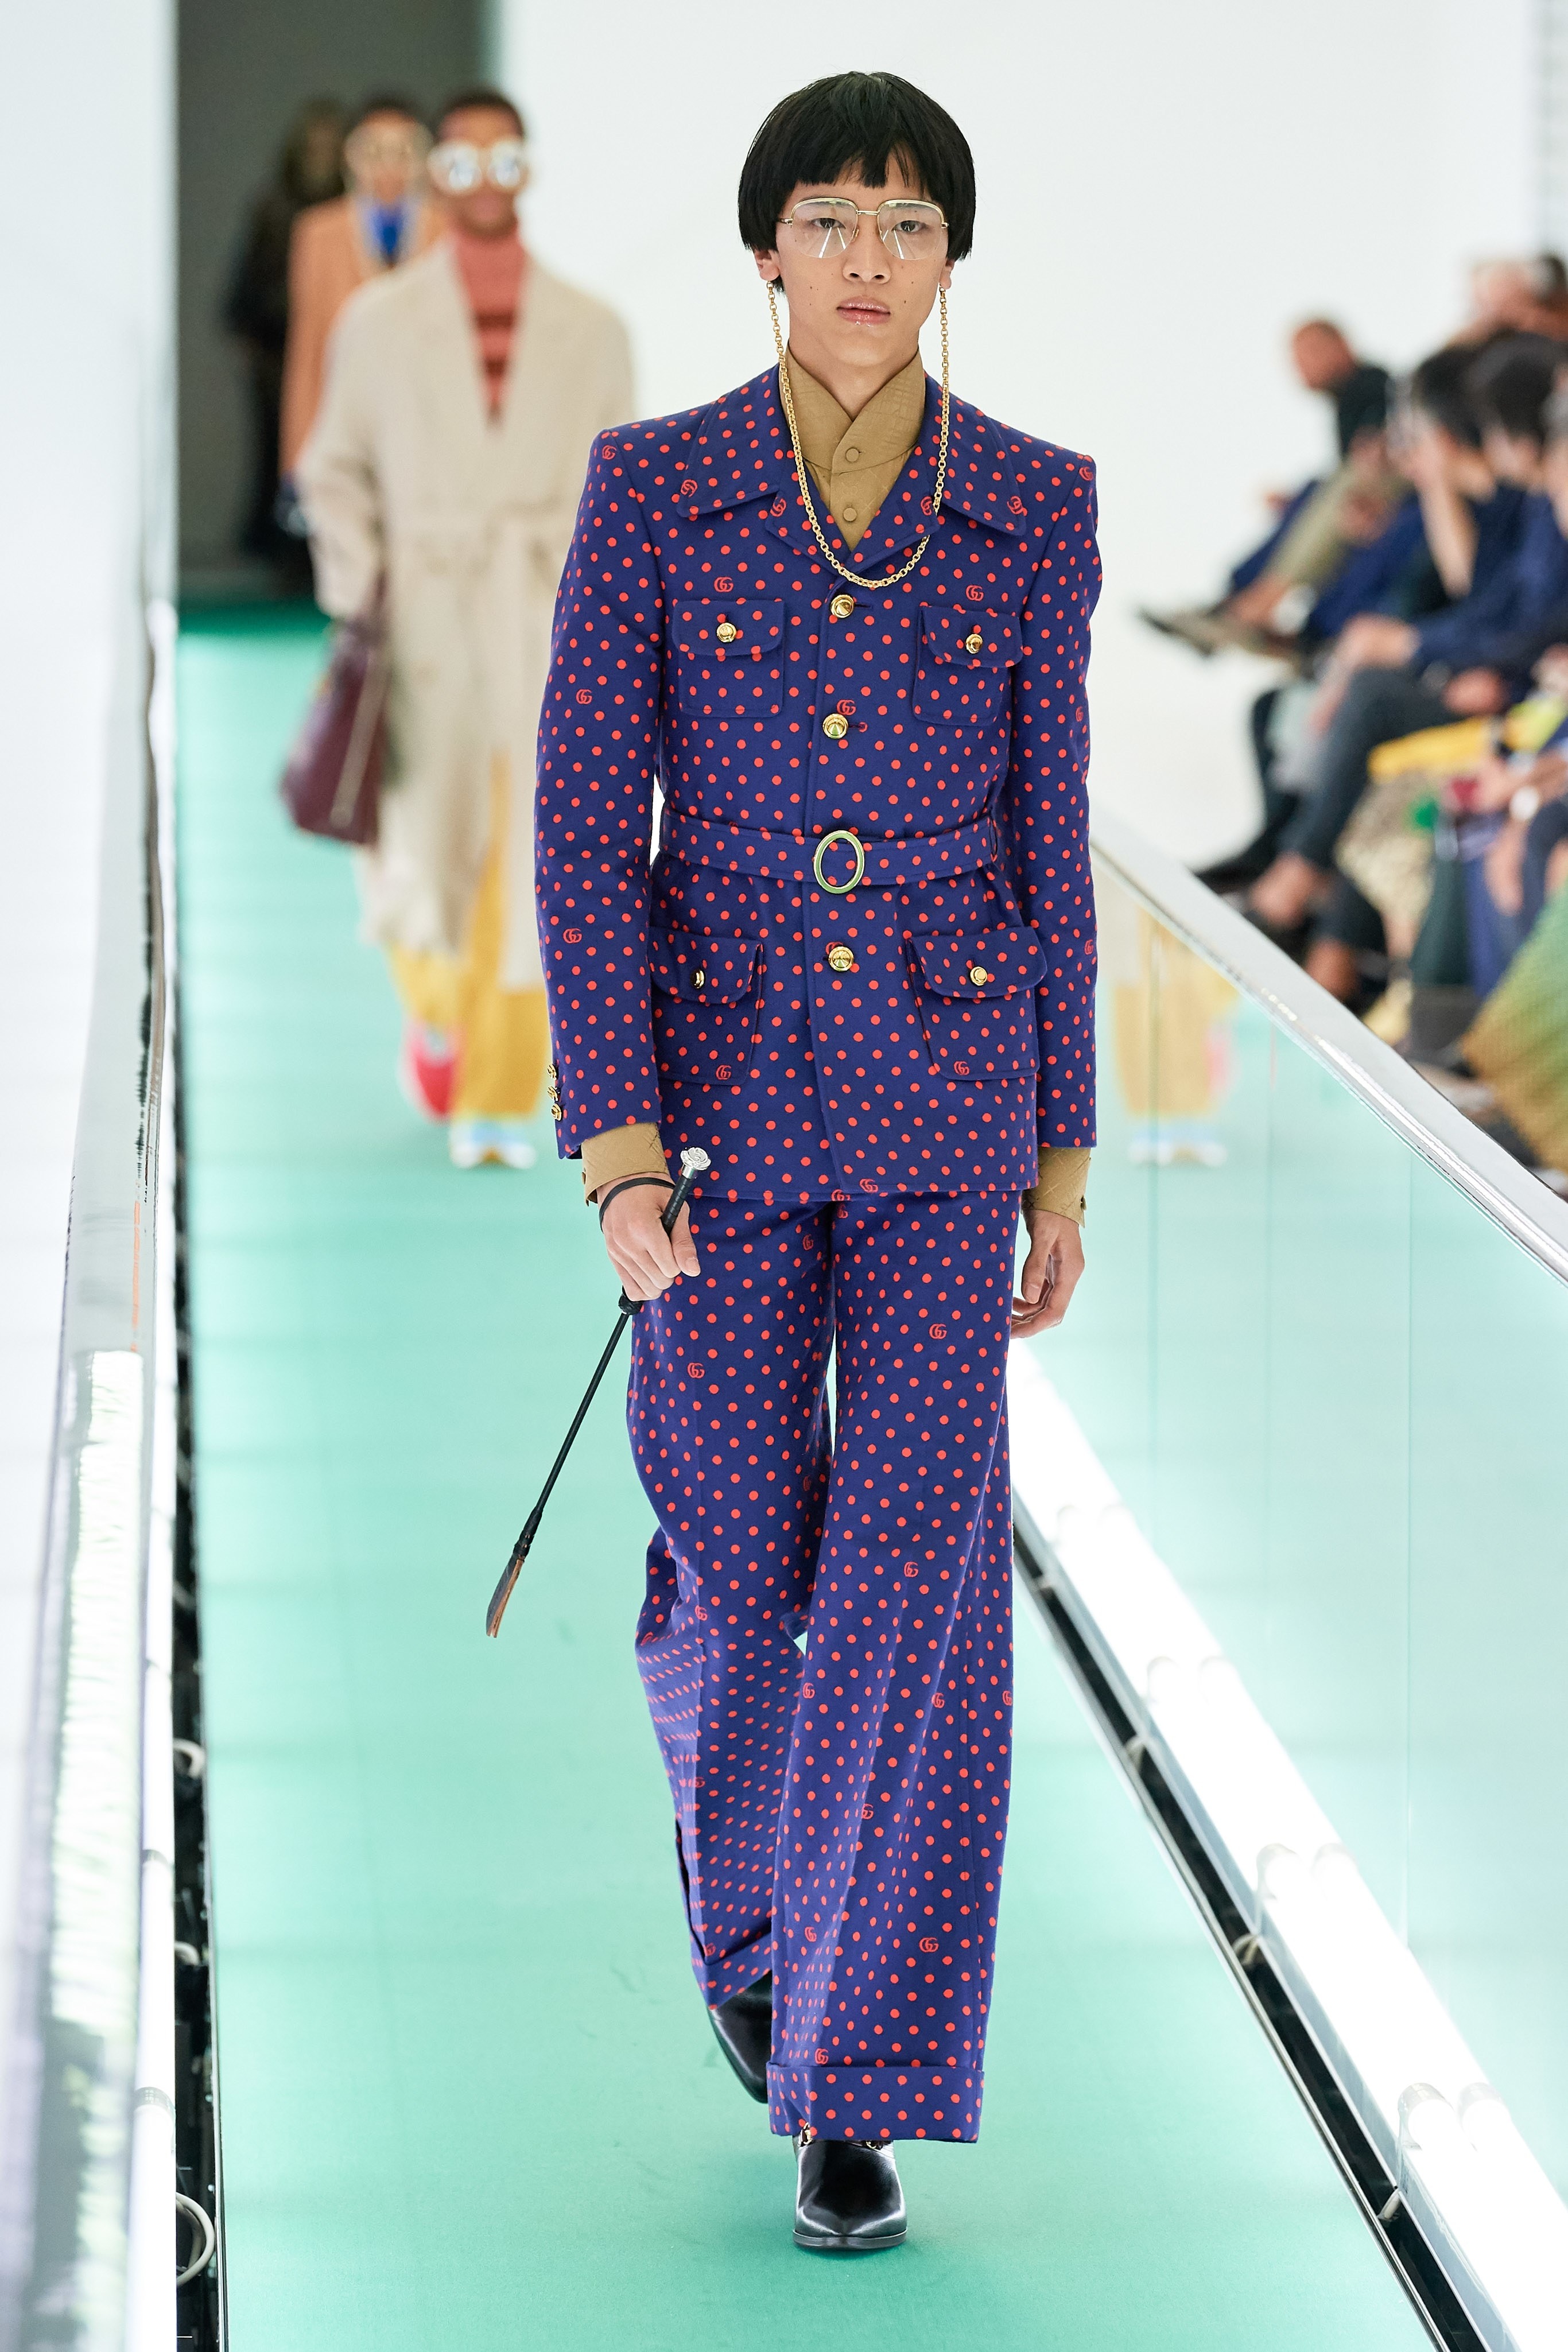 gucci spring 2020 ready to wear Alessandro Michele Milan Fashion Week